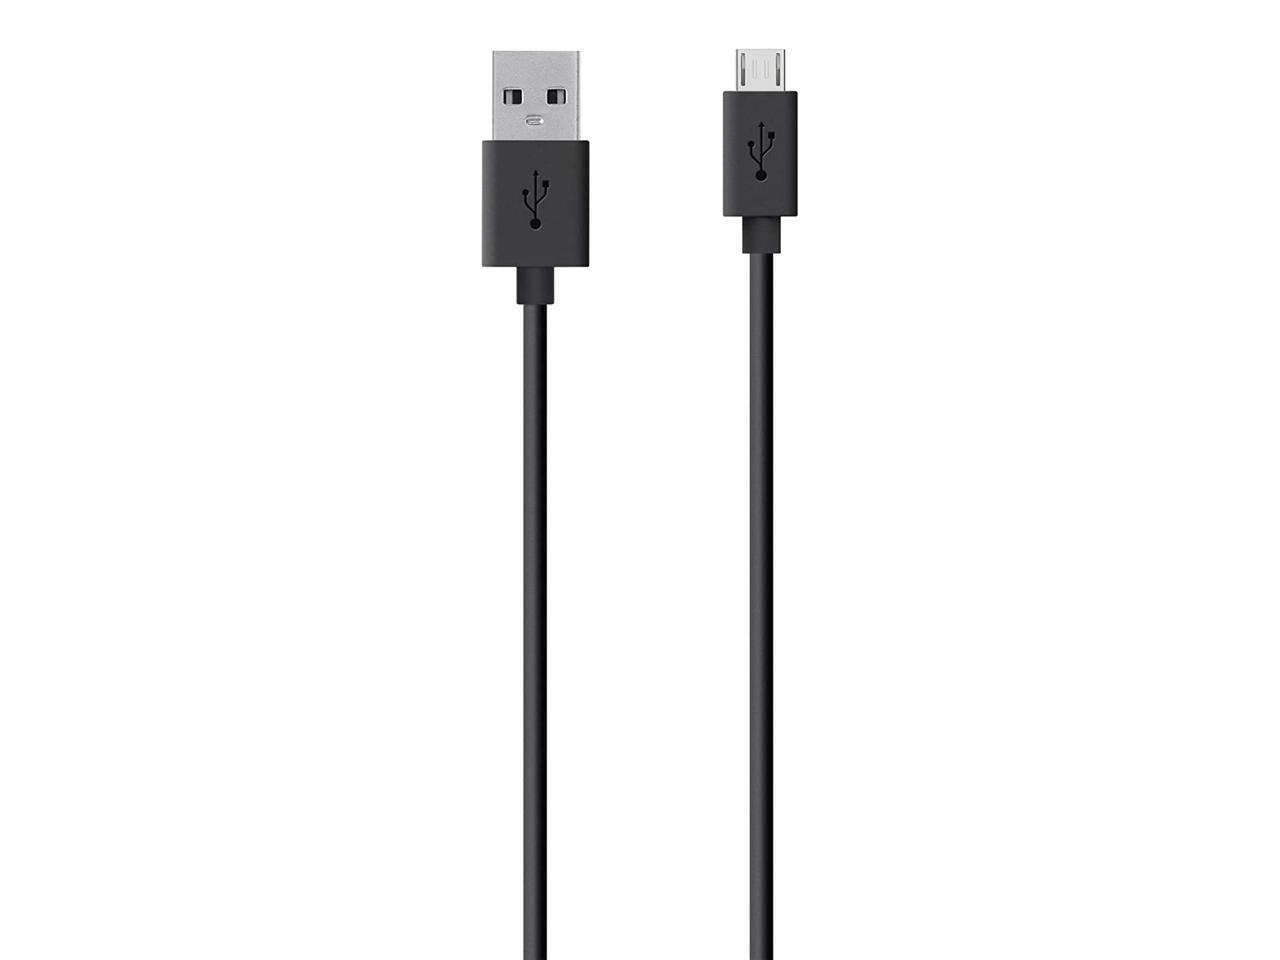 Belkin MIXIT? Micro USB ChargeSync Cable F2CU012bt3M-BLK - image 2 of 11